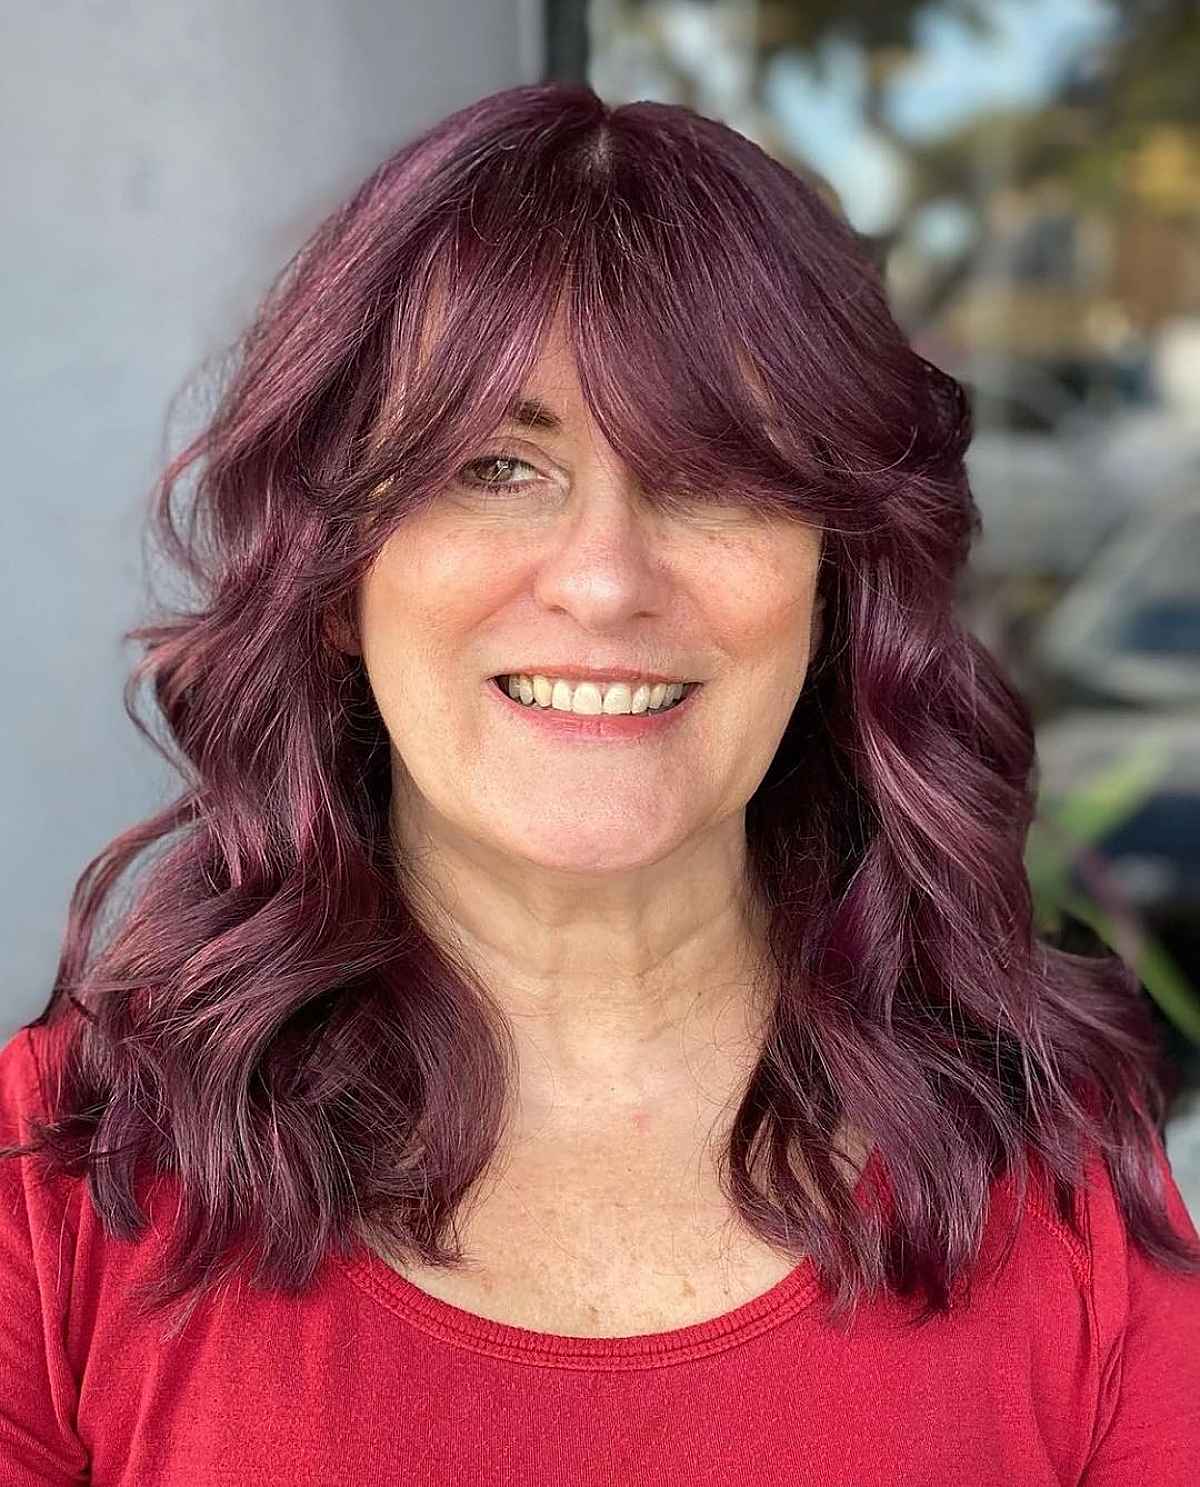 Top 10 Winter Hair Colors for Women Over 50 in 2022